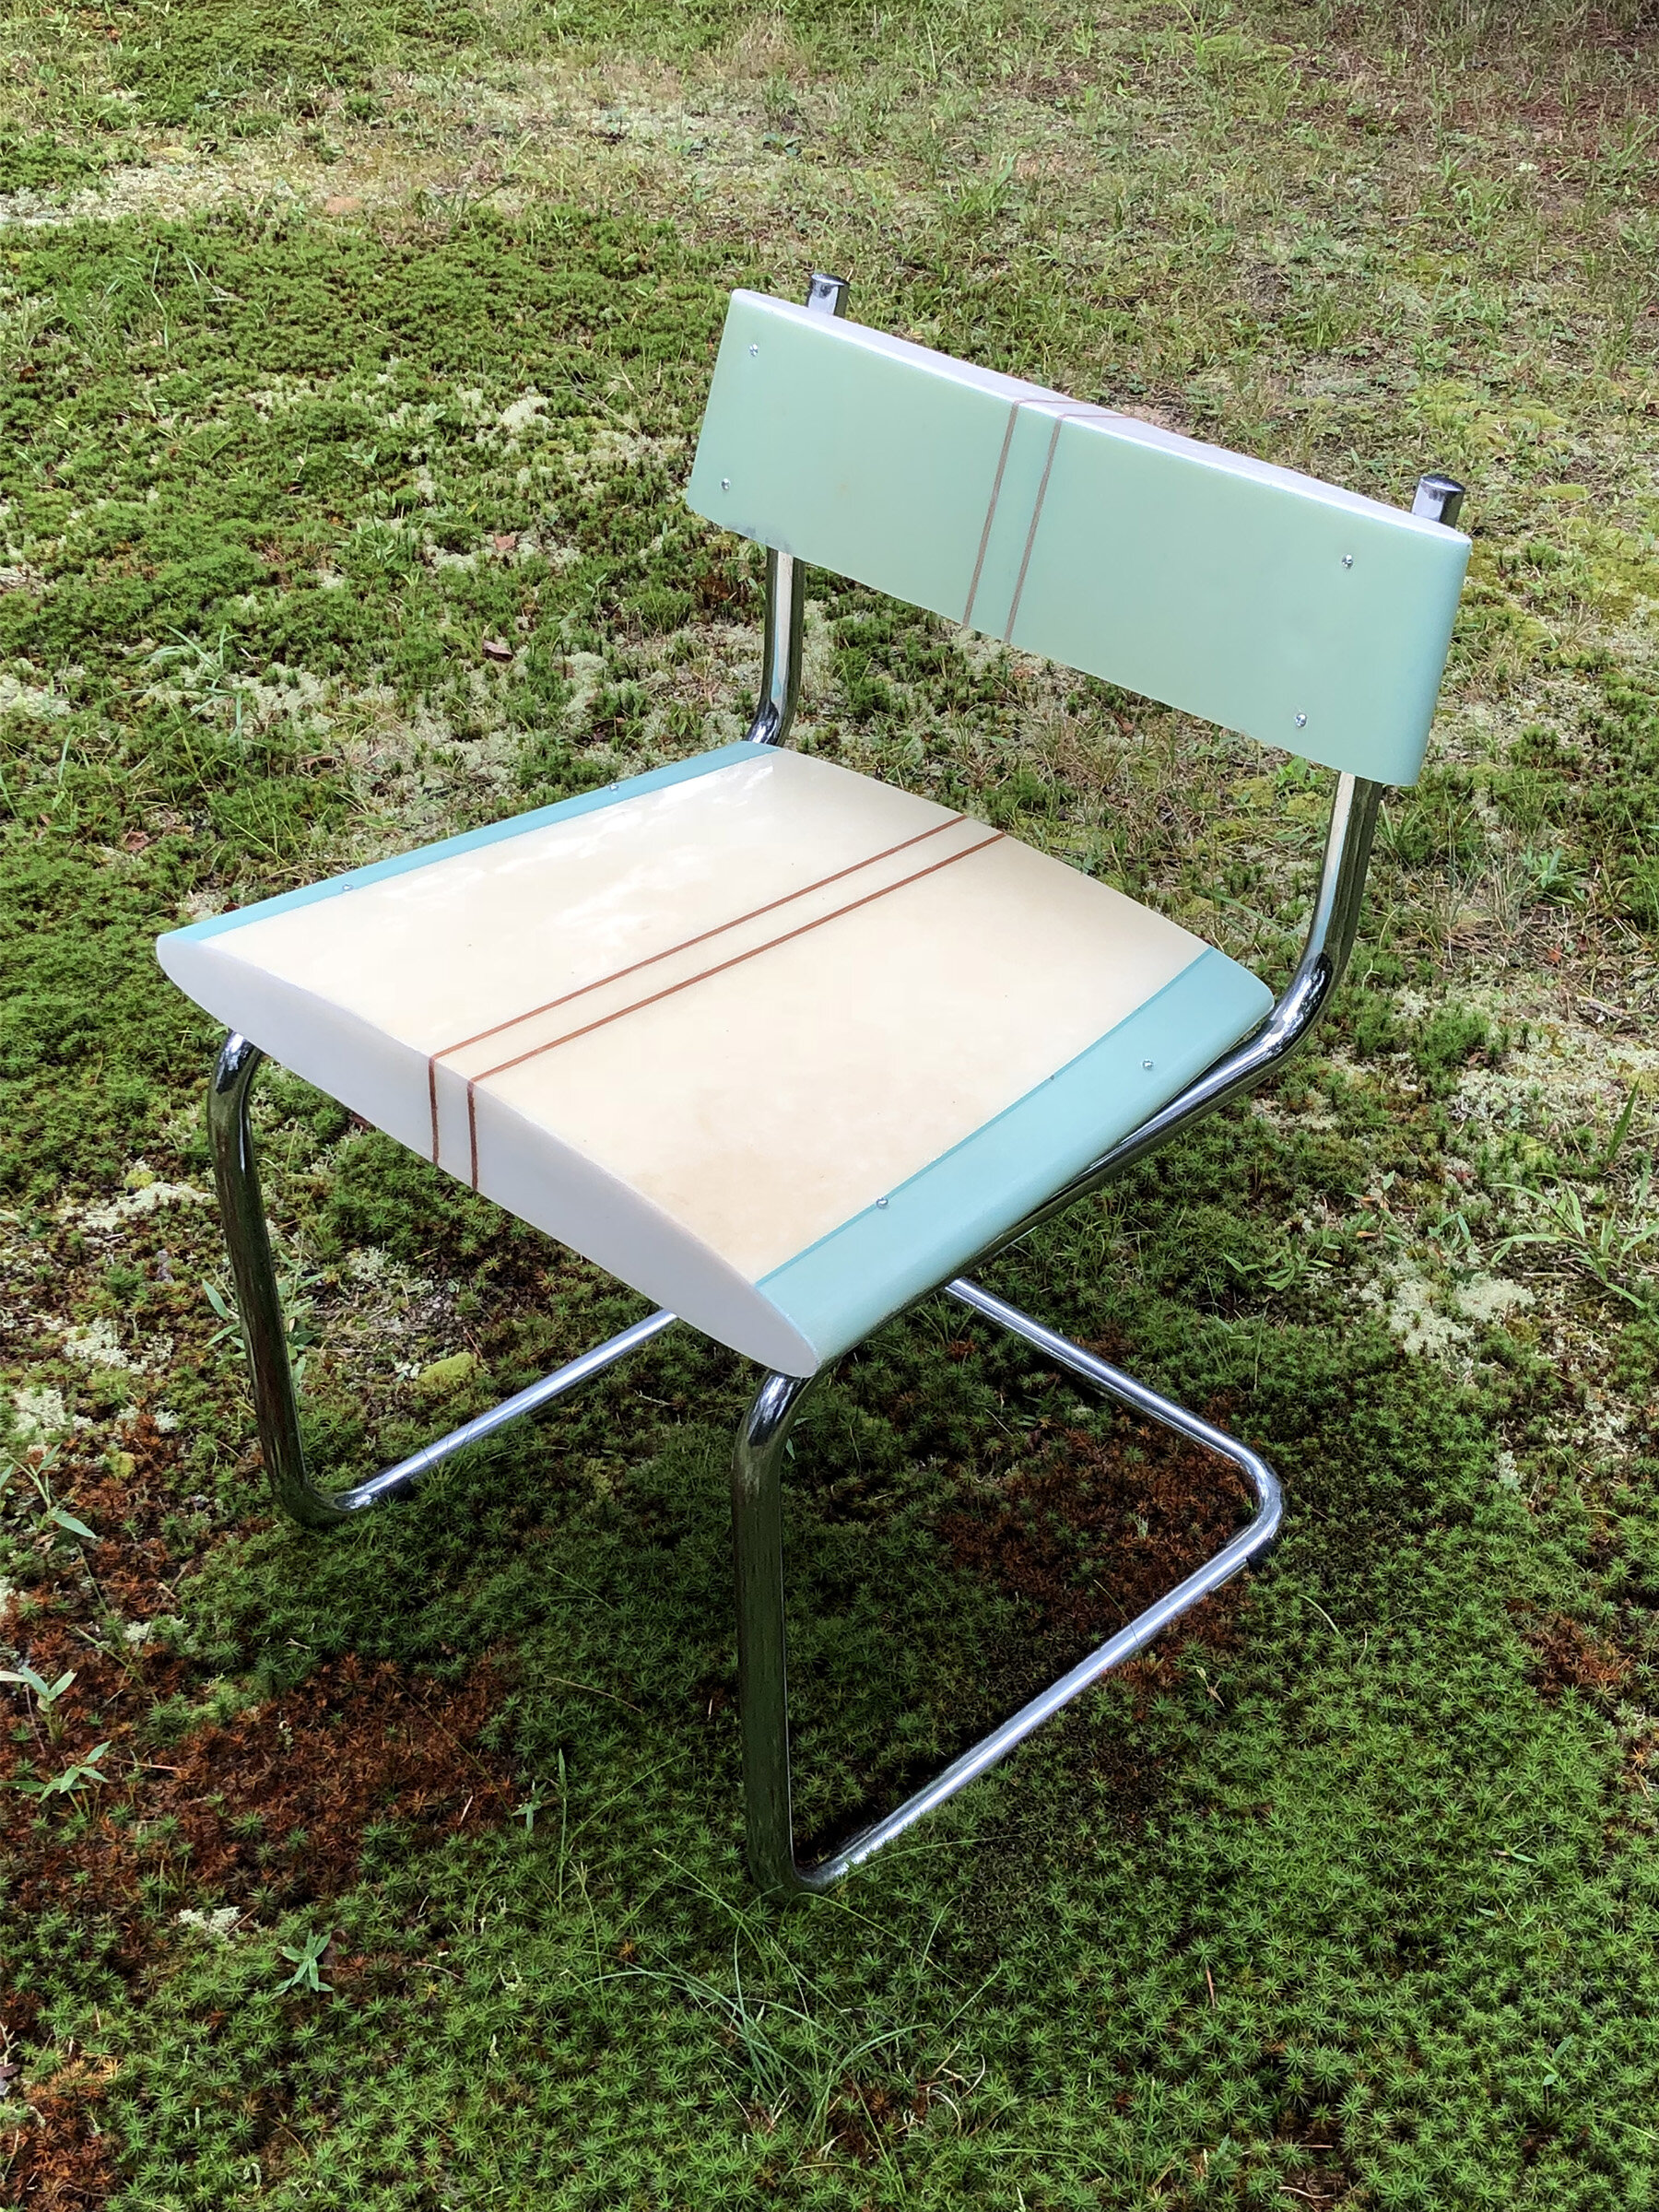    Long Division Chair    reclaimed longboard, chair frame, hardware  28” x 20” x 20”  2019  (sold) 